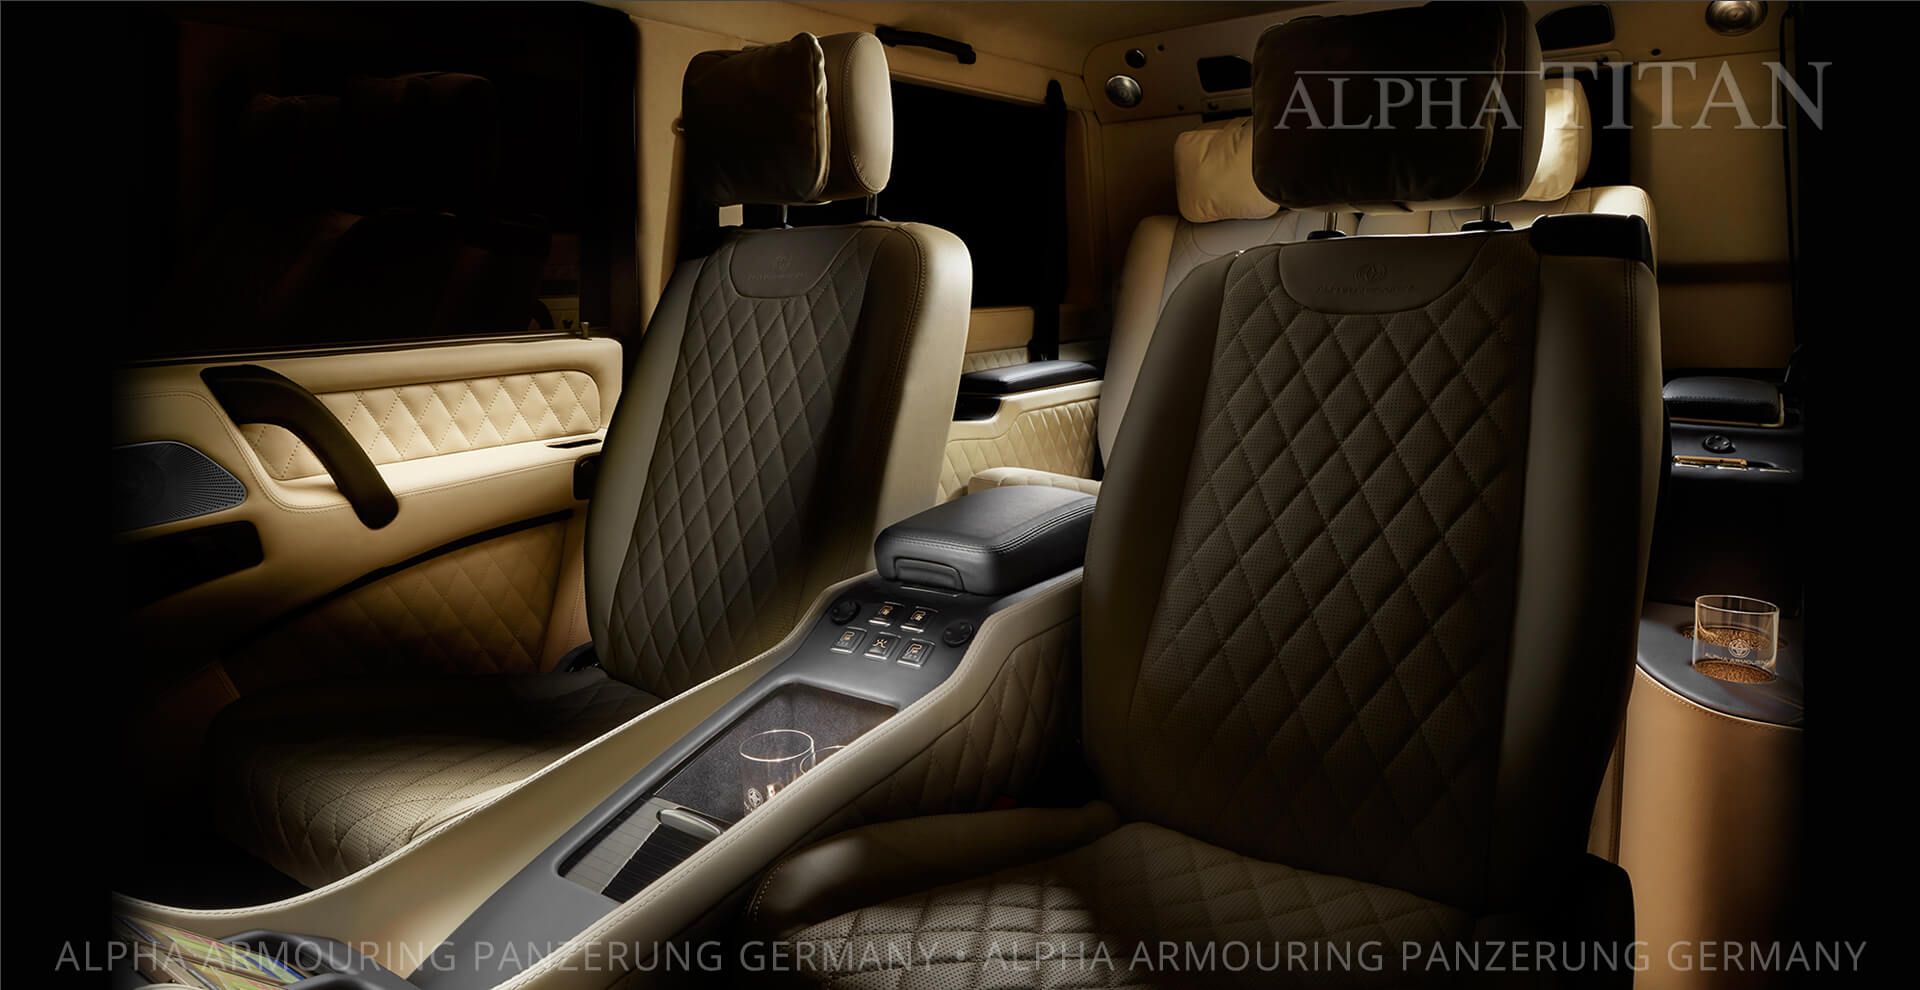 The new ALPHA TITAN the ultimate armoured luxury off-road limousine